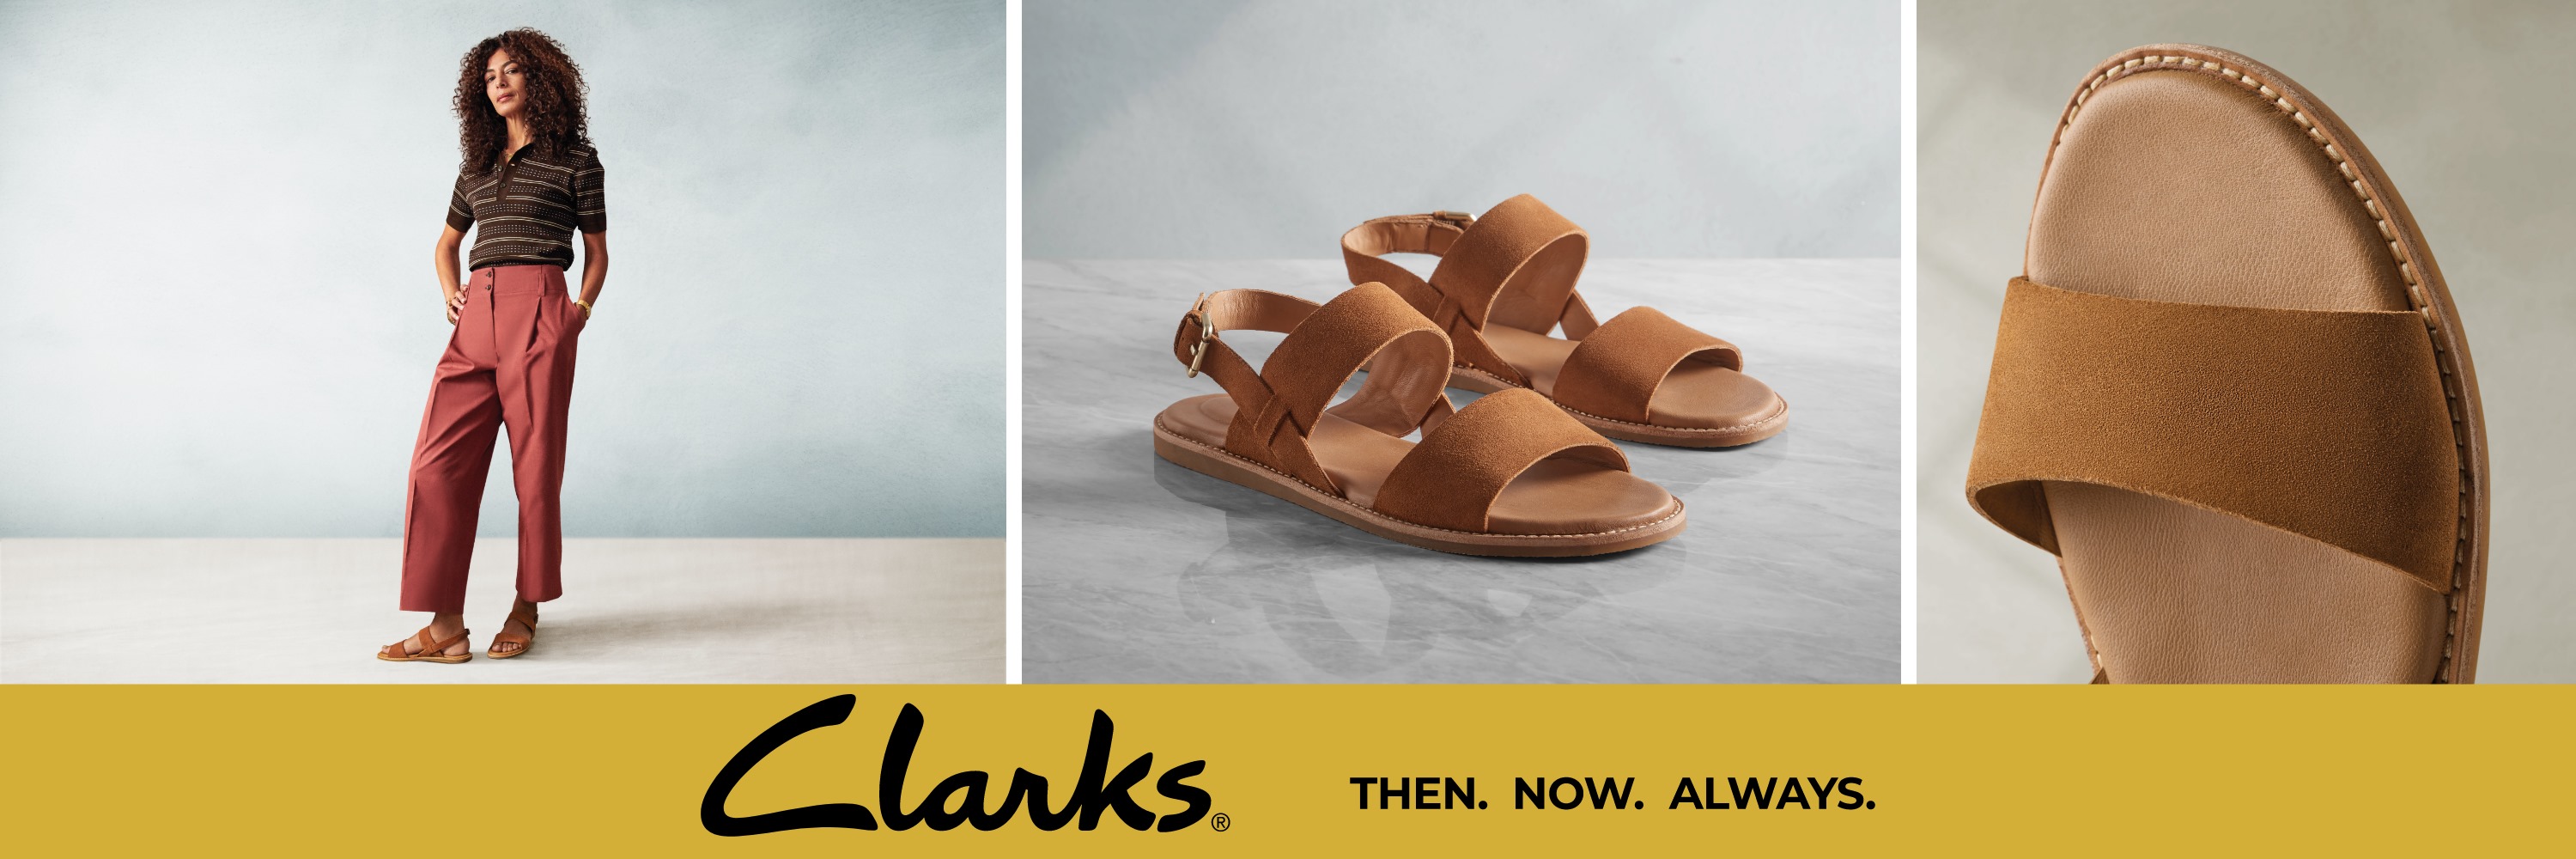 $20 OFF on New styles at Clarks